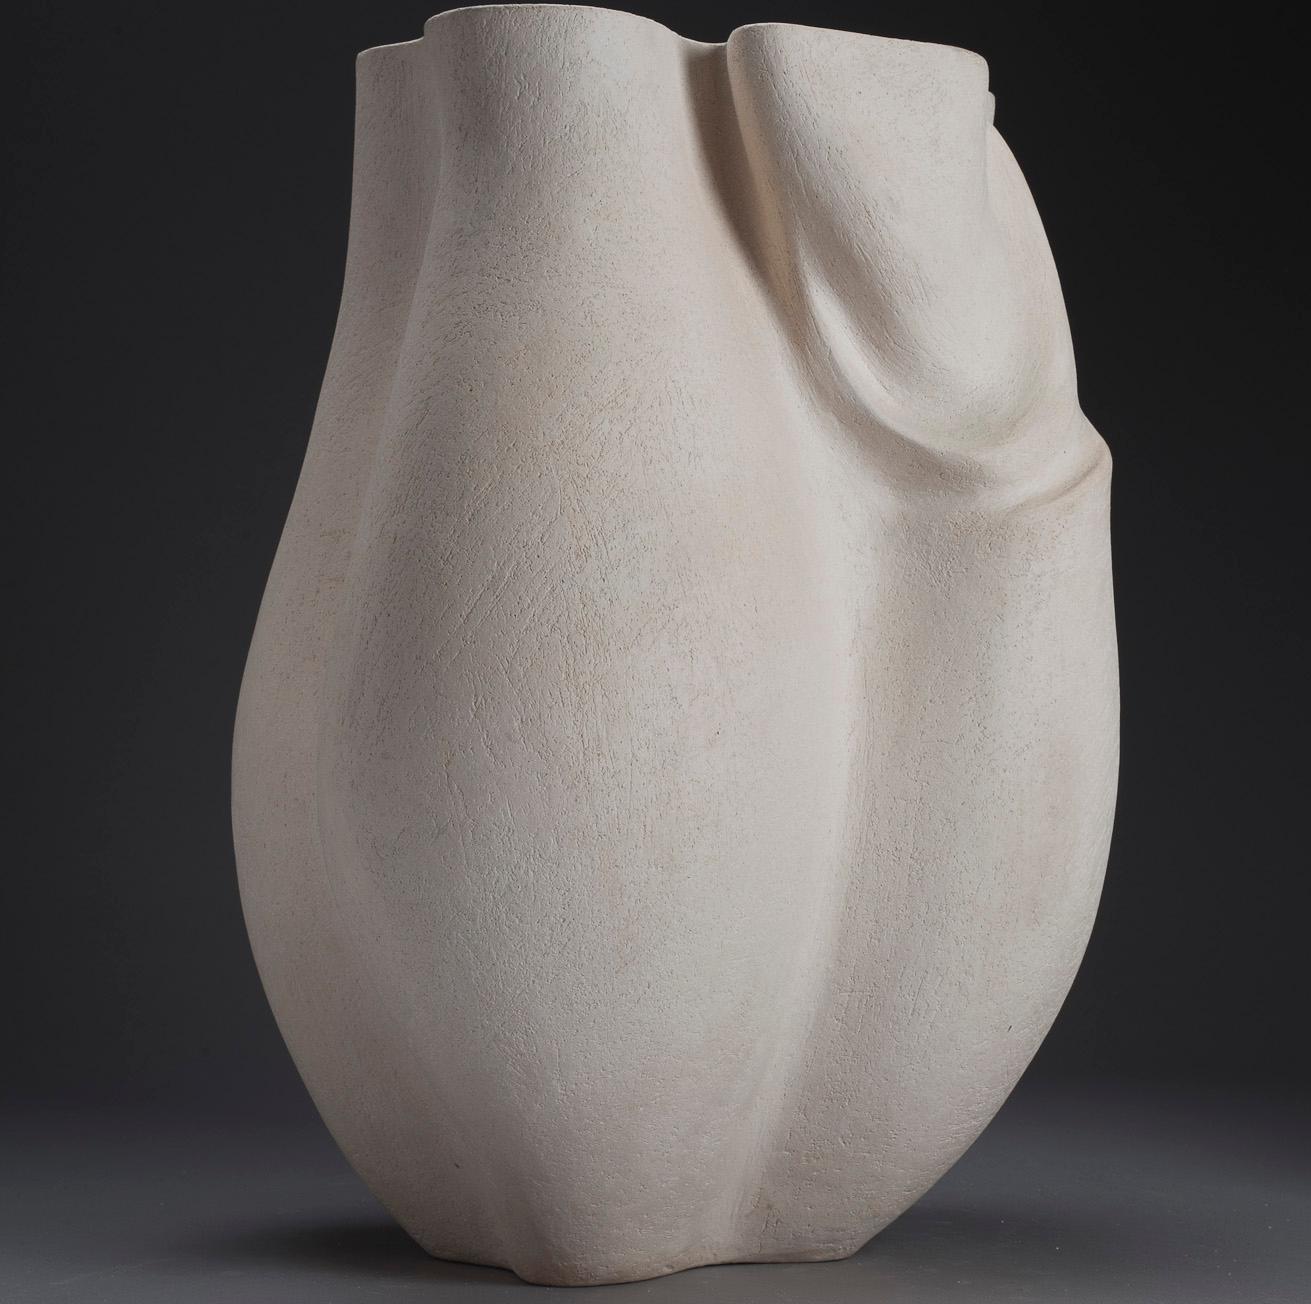 Steve Cartwright, Hip Vessel 2

Handmade Sculptural Ceramic, Stoneware Clay, fired to 1250c

45 x 29 cm (17.7 x 11.4 in)

Edition of 5 per year